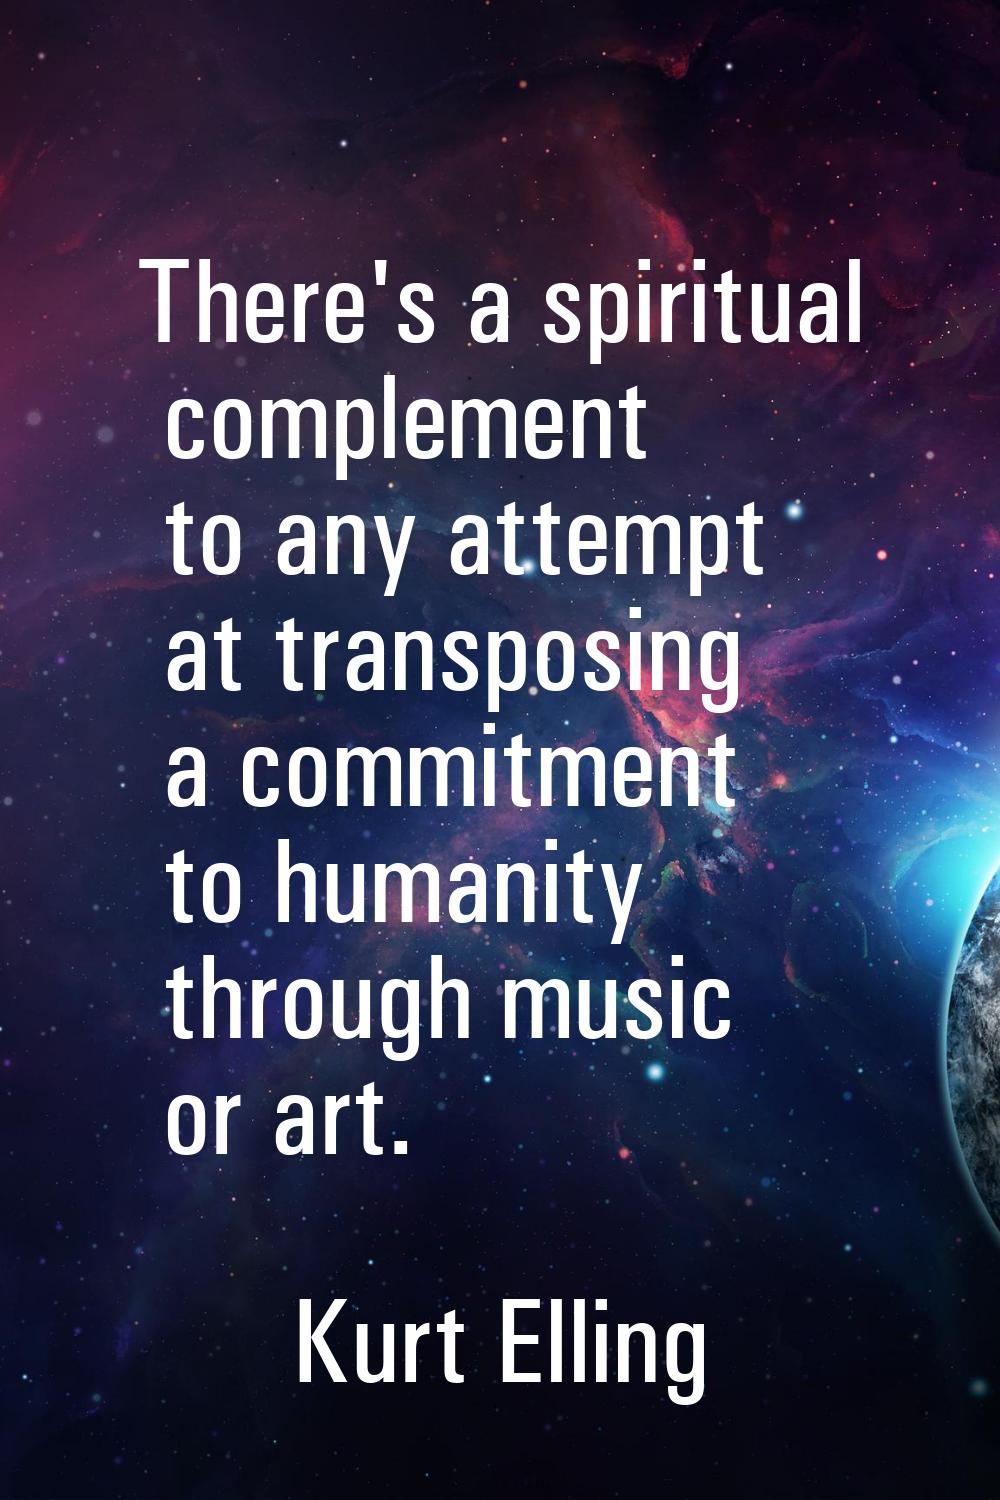 There's a spiritual complement to any attempt at transposing a commitment to humanity through music